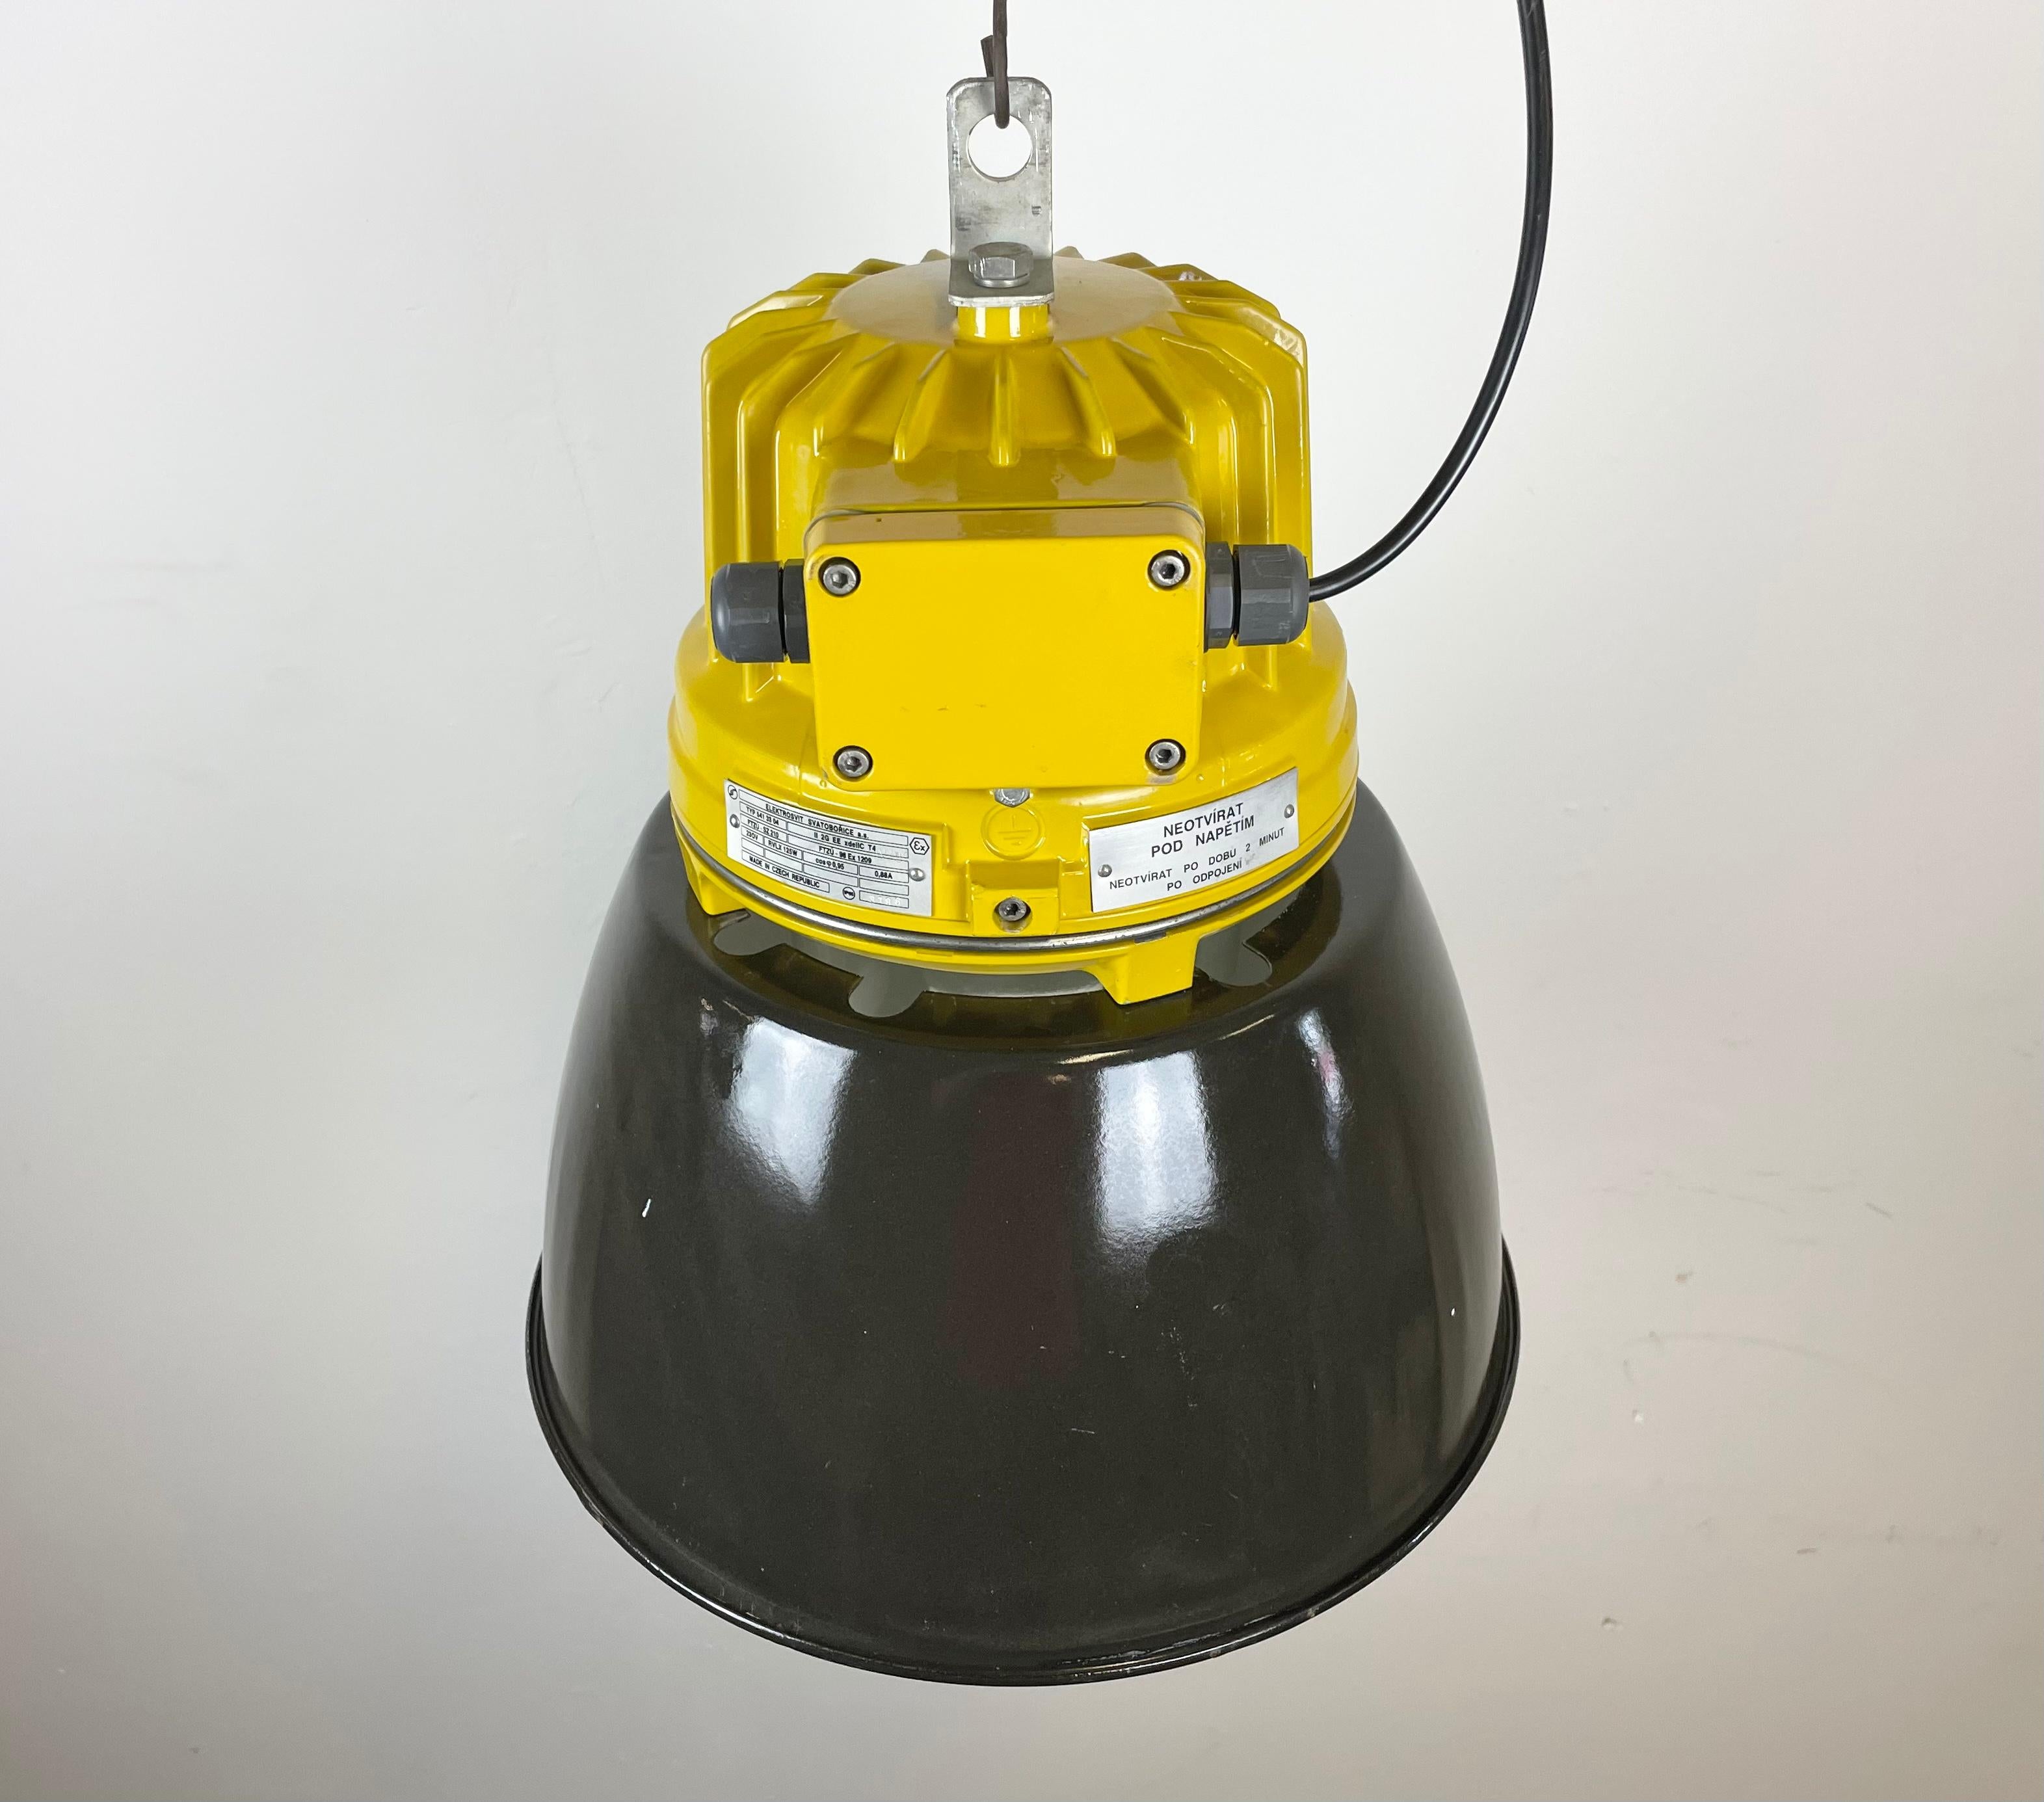 Aluminum Yellow Industrial Explosion Proof Lamp with Black Enameled Shade, 1990s